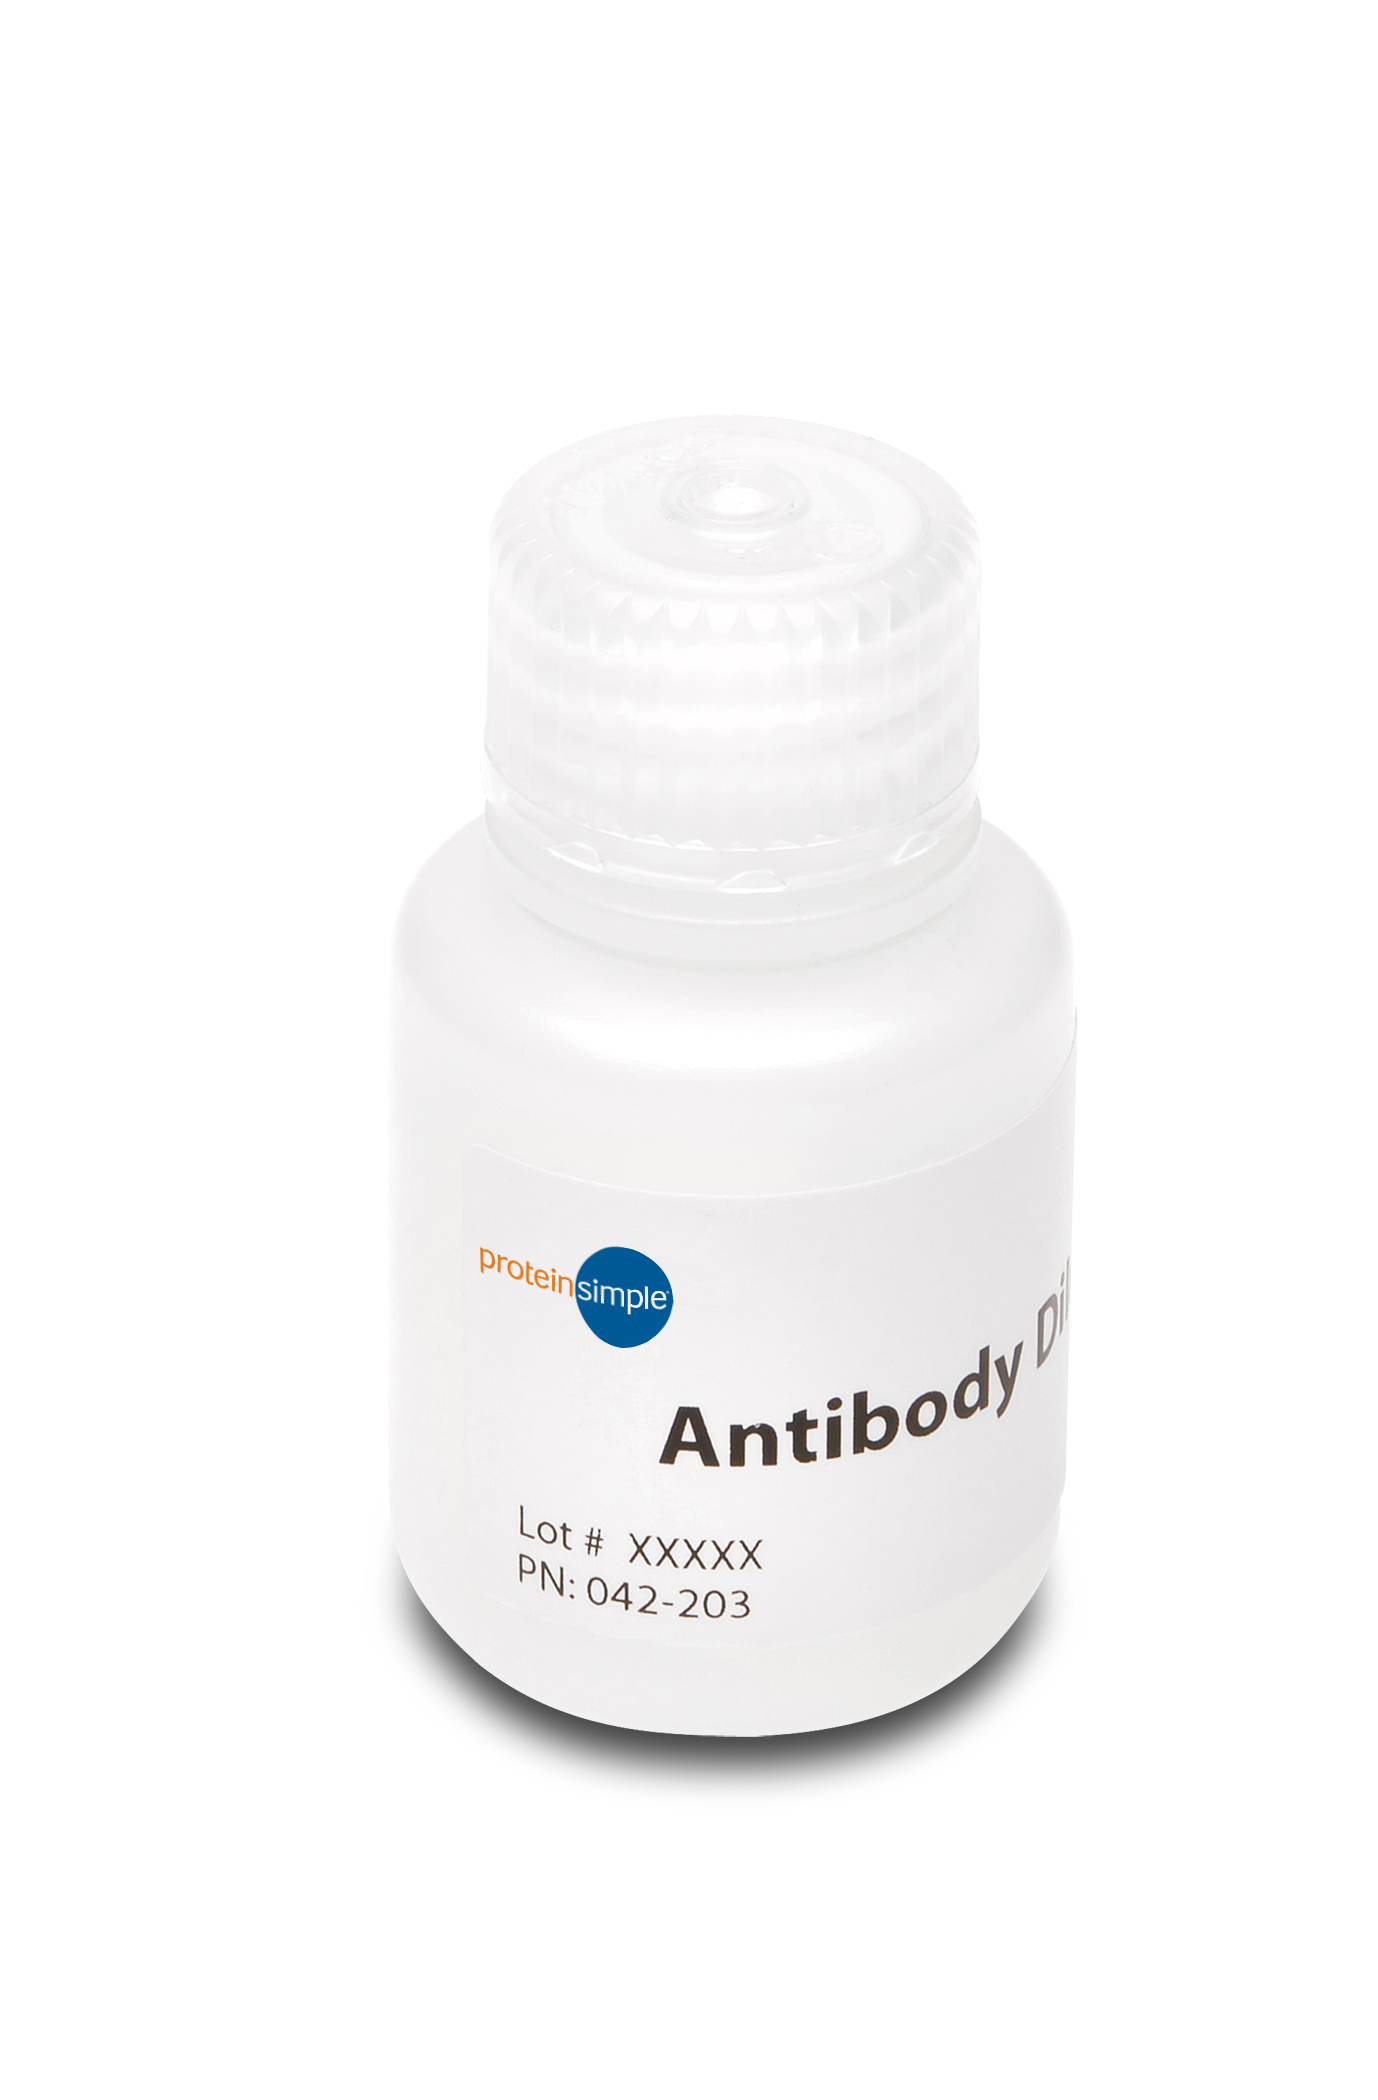 ProteinSimple Antibody Diluent 2 for Simple Western